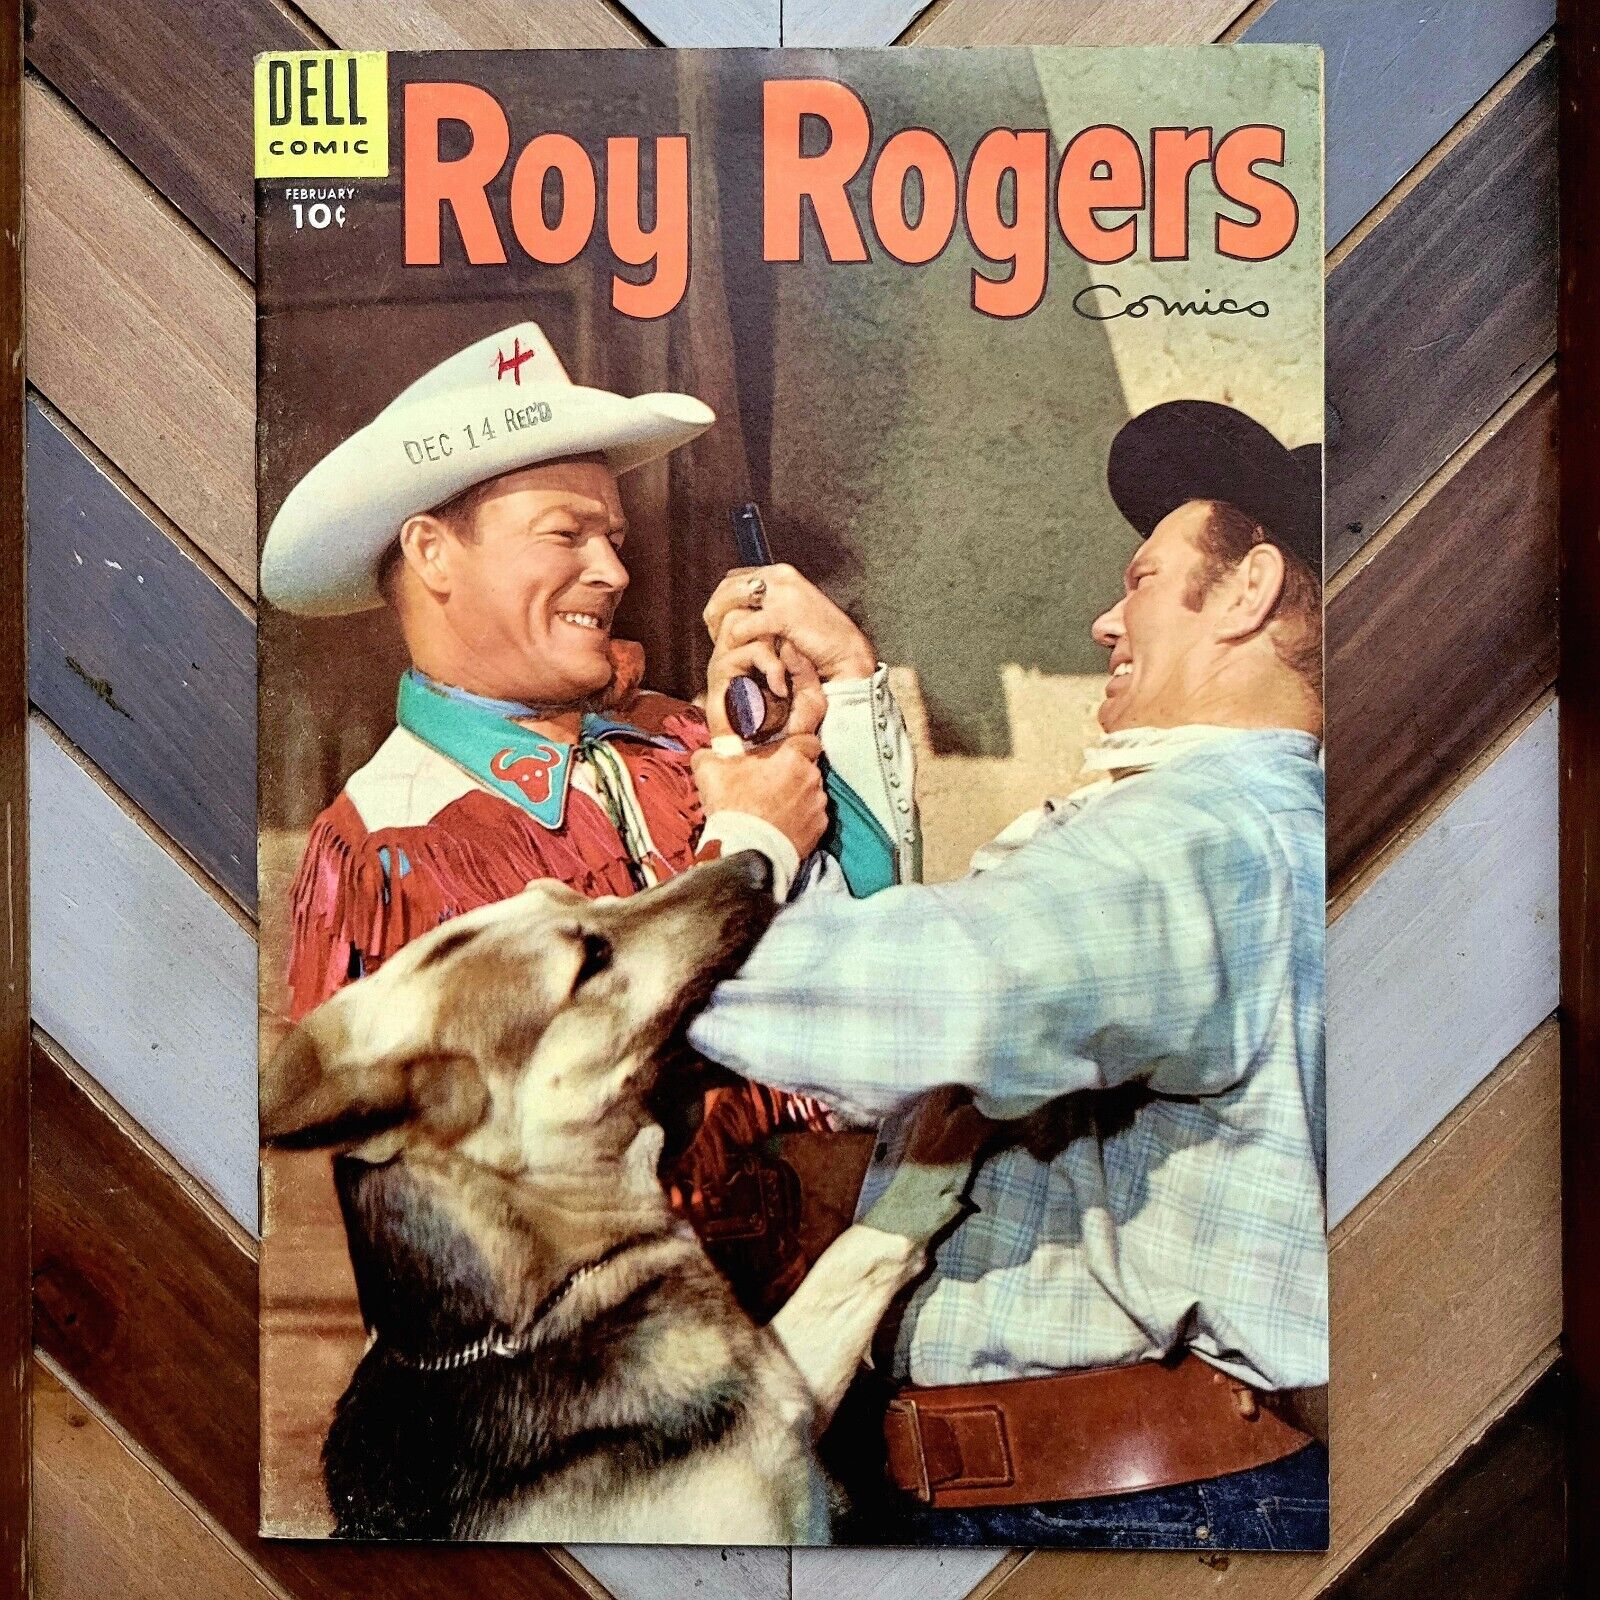 ROY ROGERS #86 FN/VF (Dell 1955) John Buscema GOLDEN AGE WESTERN 10c PHOTO COVER